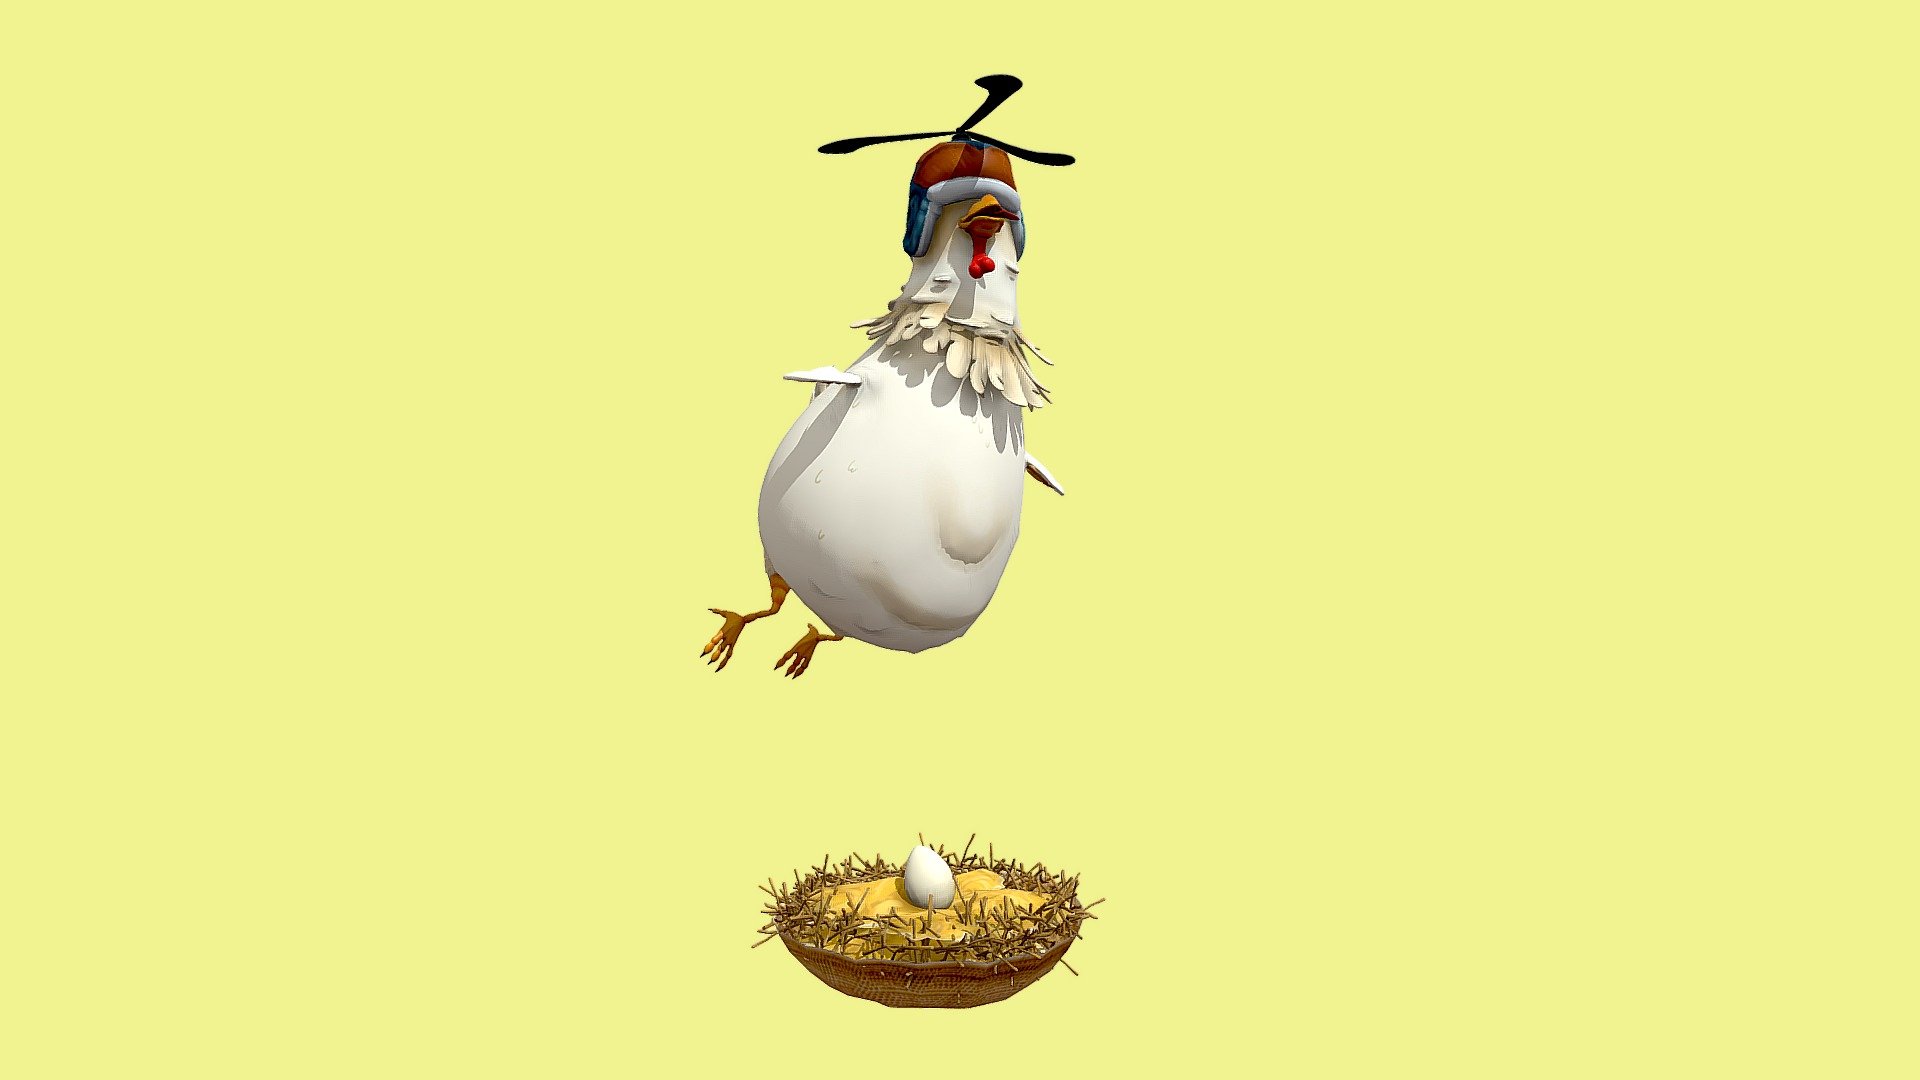 Made this character for fun and also ended up getting some retopology practice.

The thought behind this character (if you would call it that) is:

because regular chickens can't fly, some handy-man/farmer fashioned this flying device for his favourite chicken 3d model